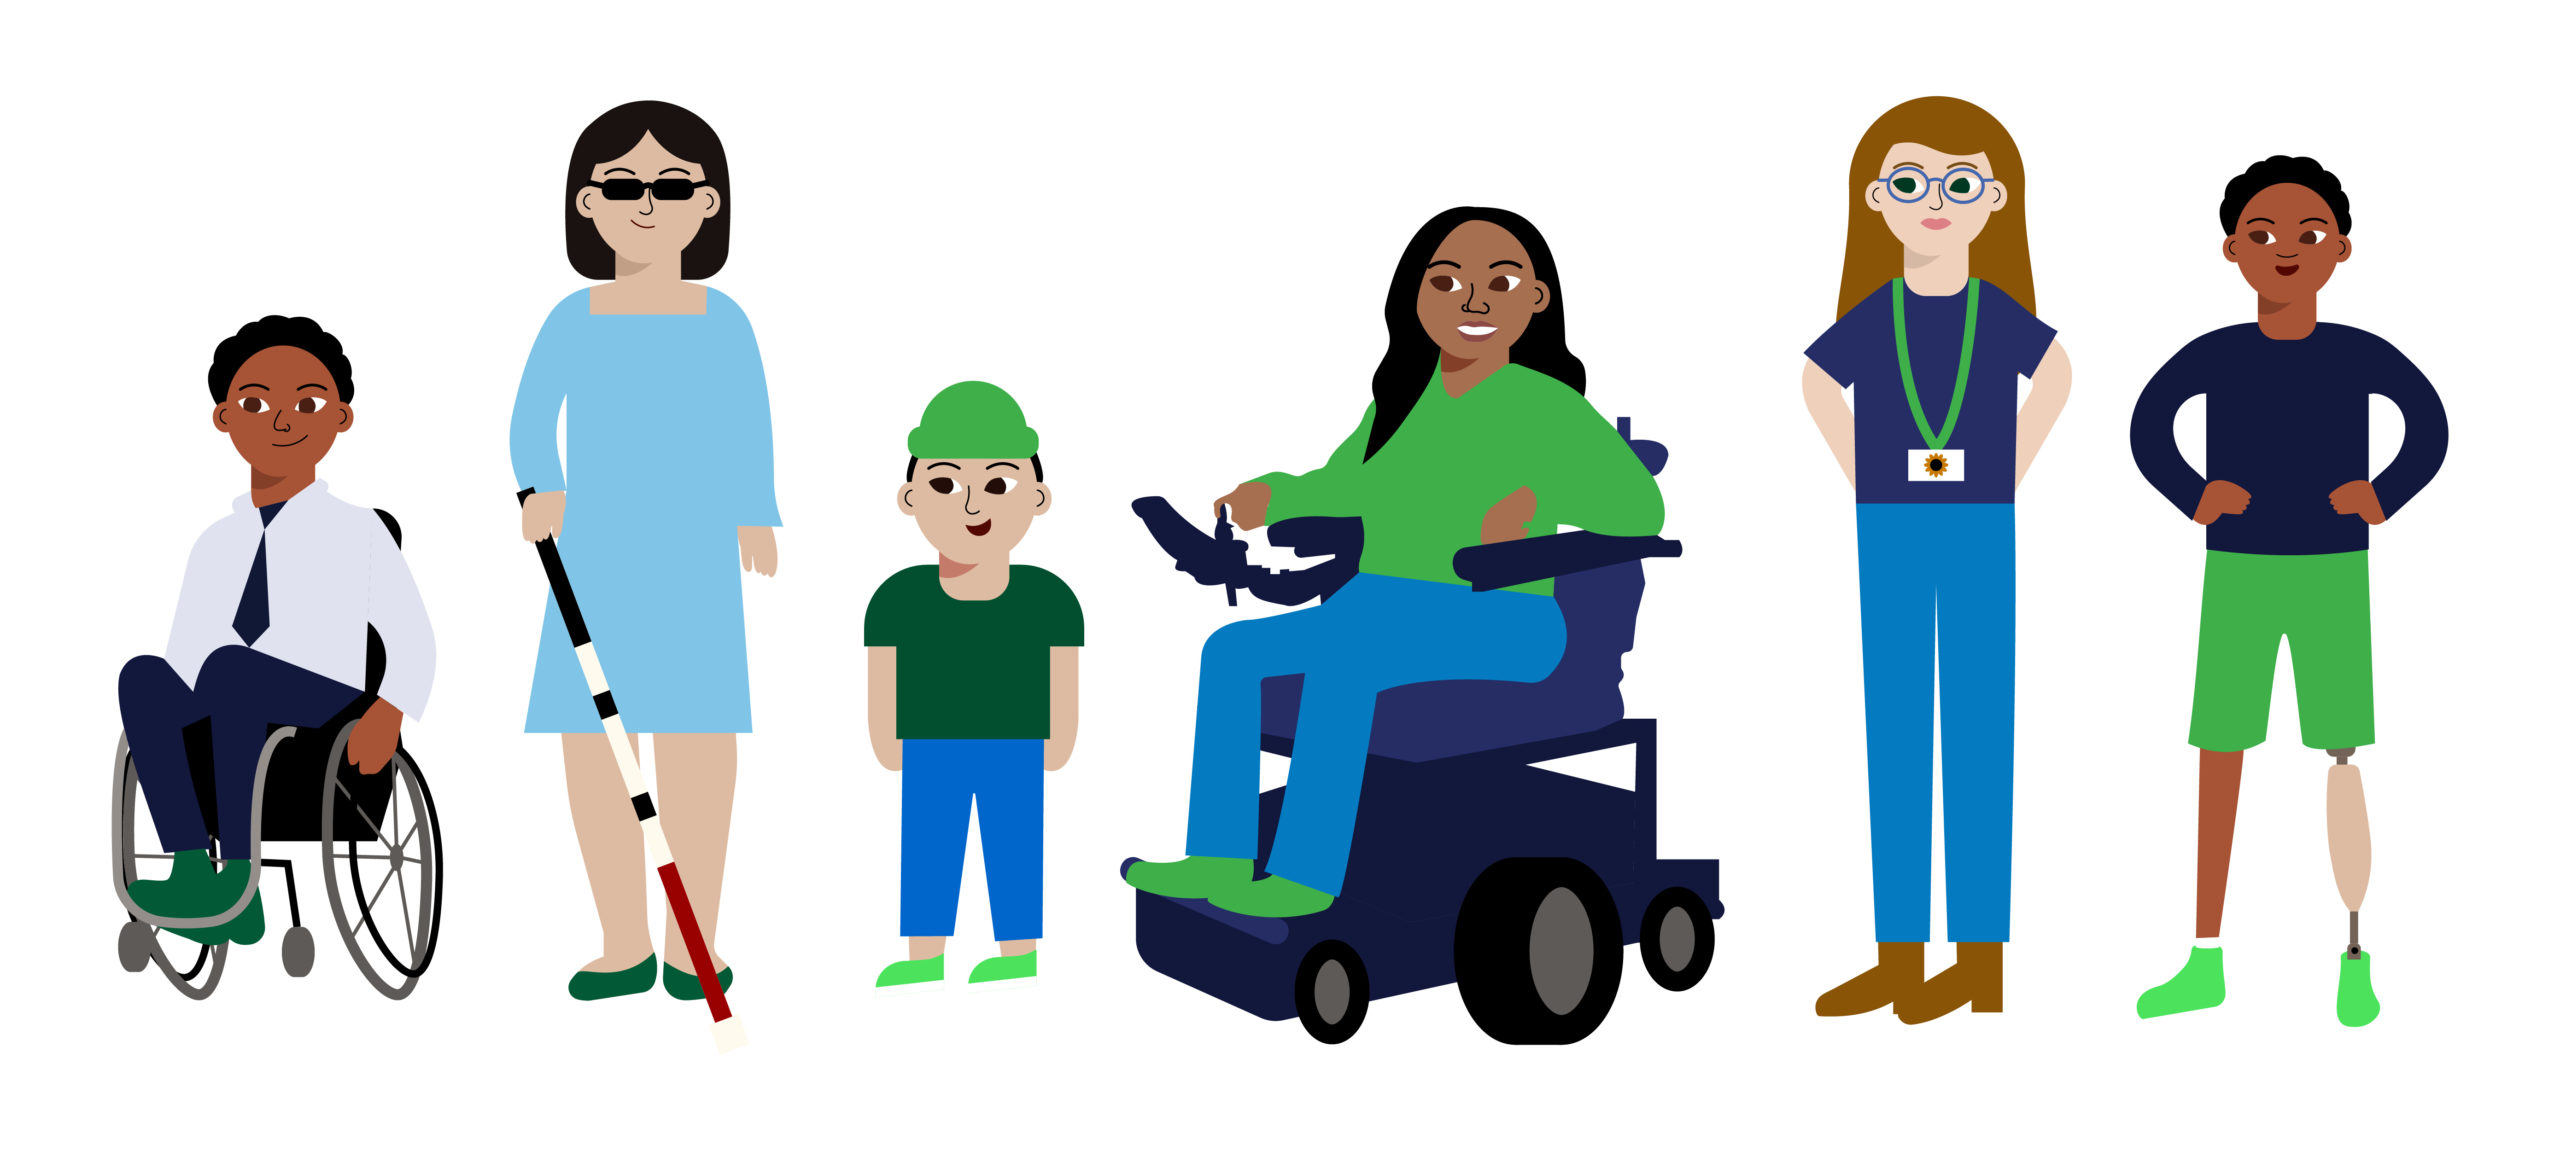 Six illustrated individuals with disabilities: Black man using a wheelchair, Asian woman with a white cane, Latiné with Dwarfism, Black woman in a power chair, white woman with sunflower lanyard for autism, and a Black amputee man. 